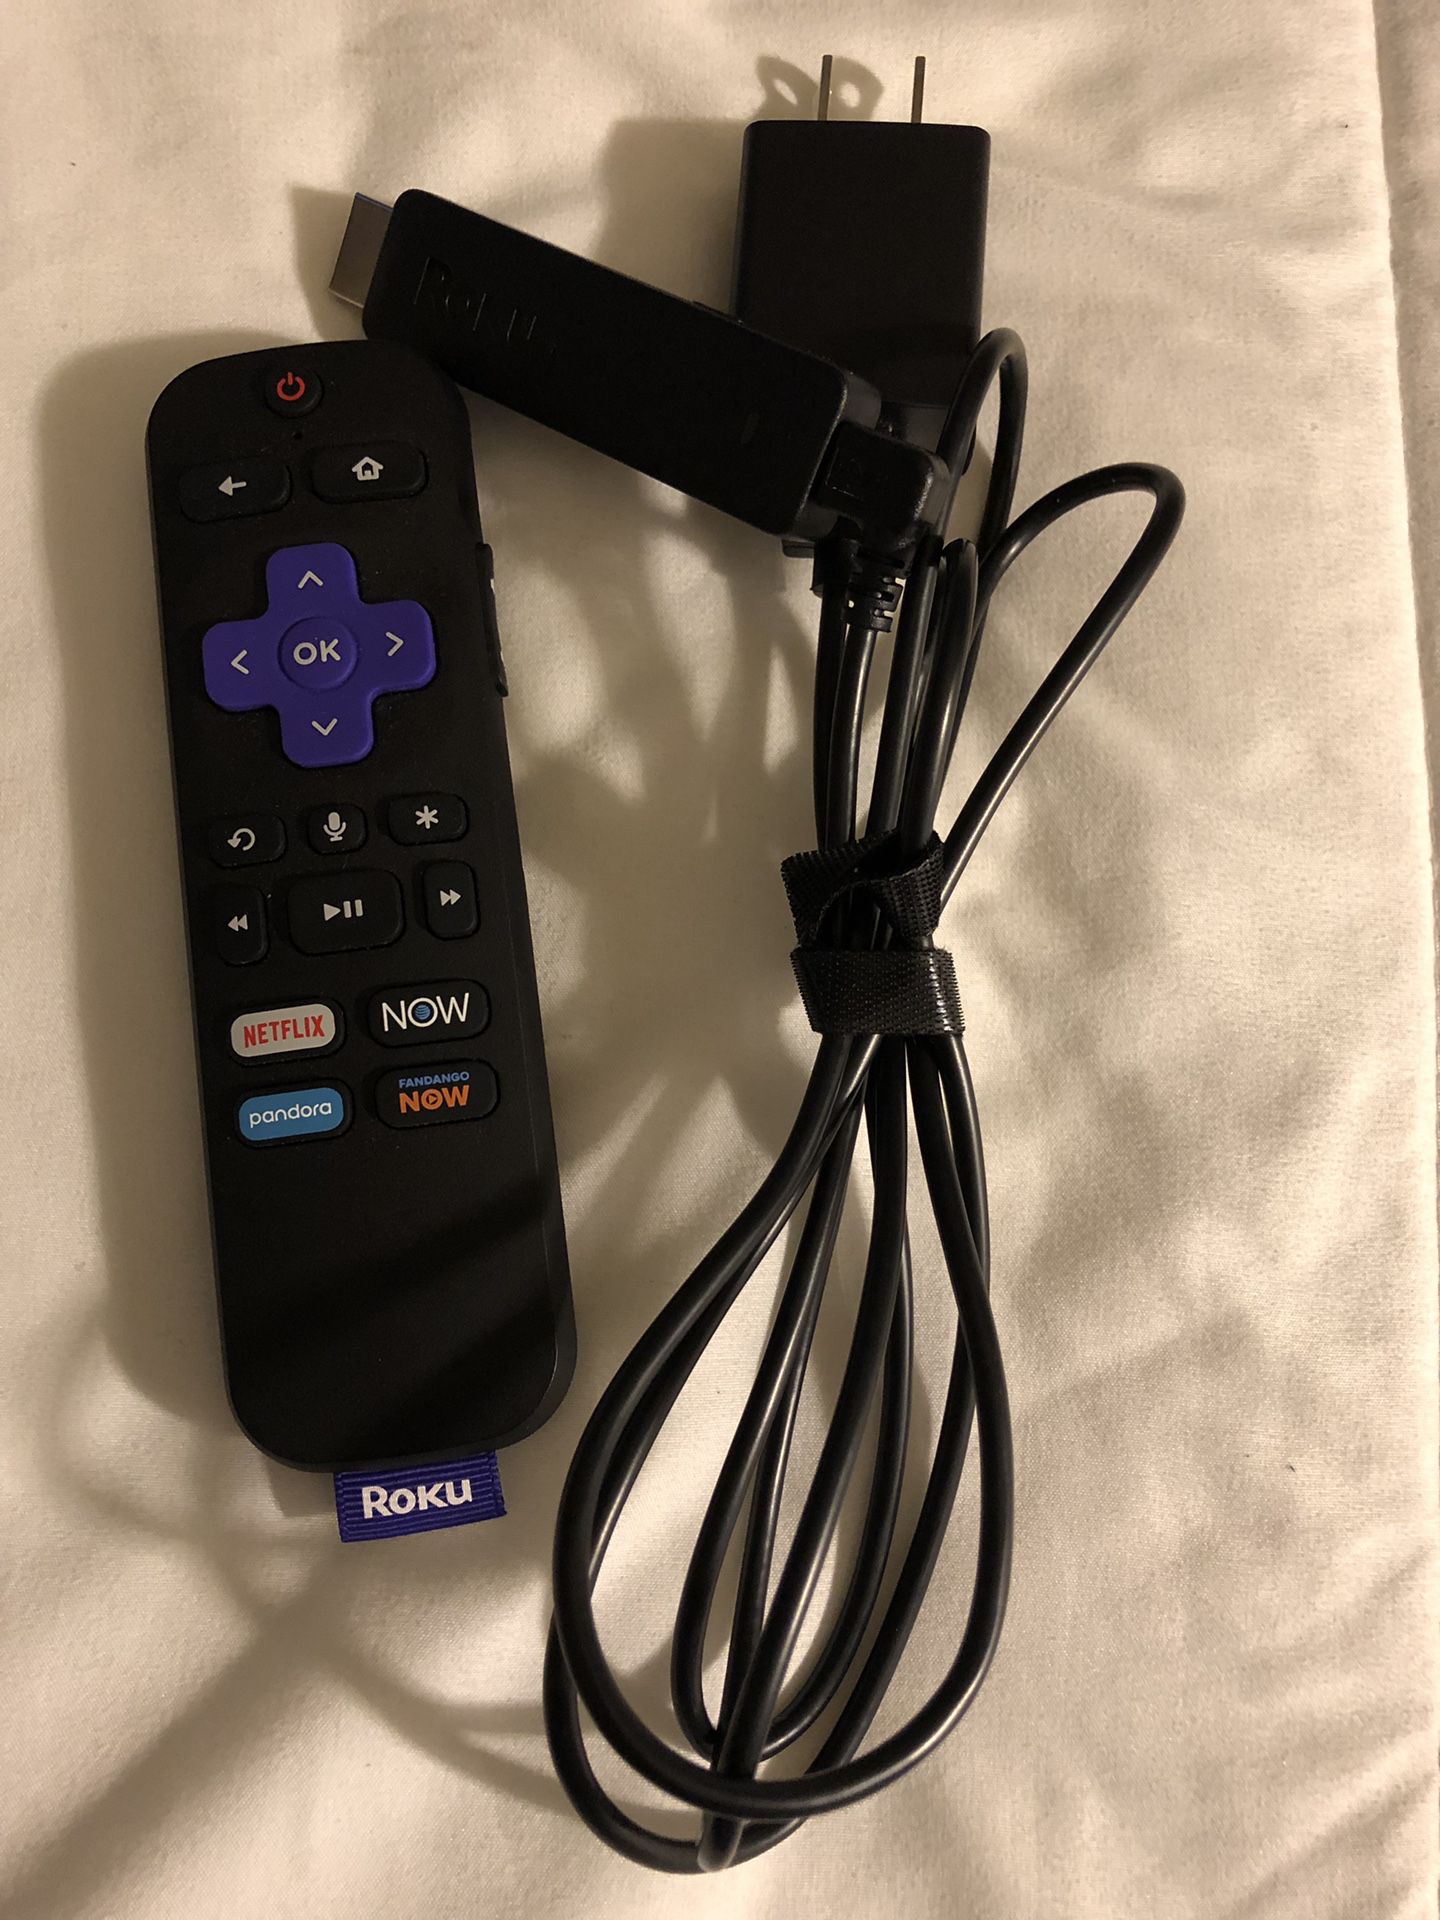 Roku streaming stick with voice control